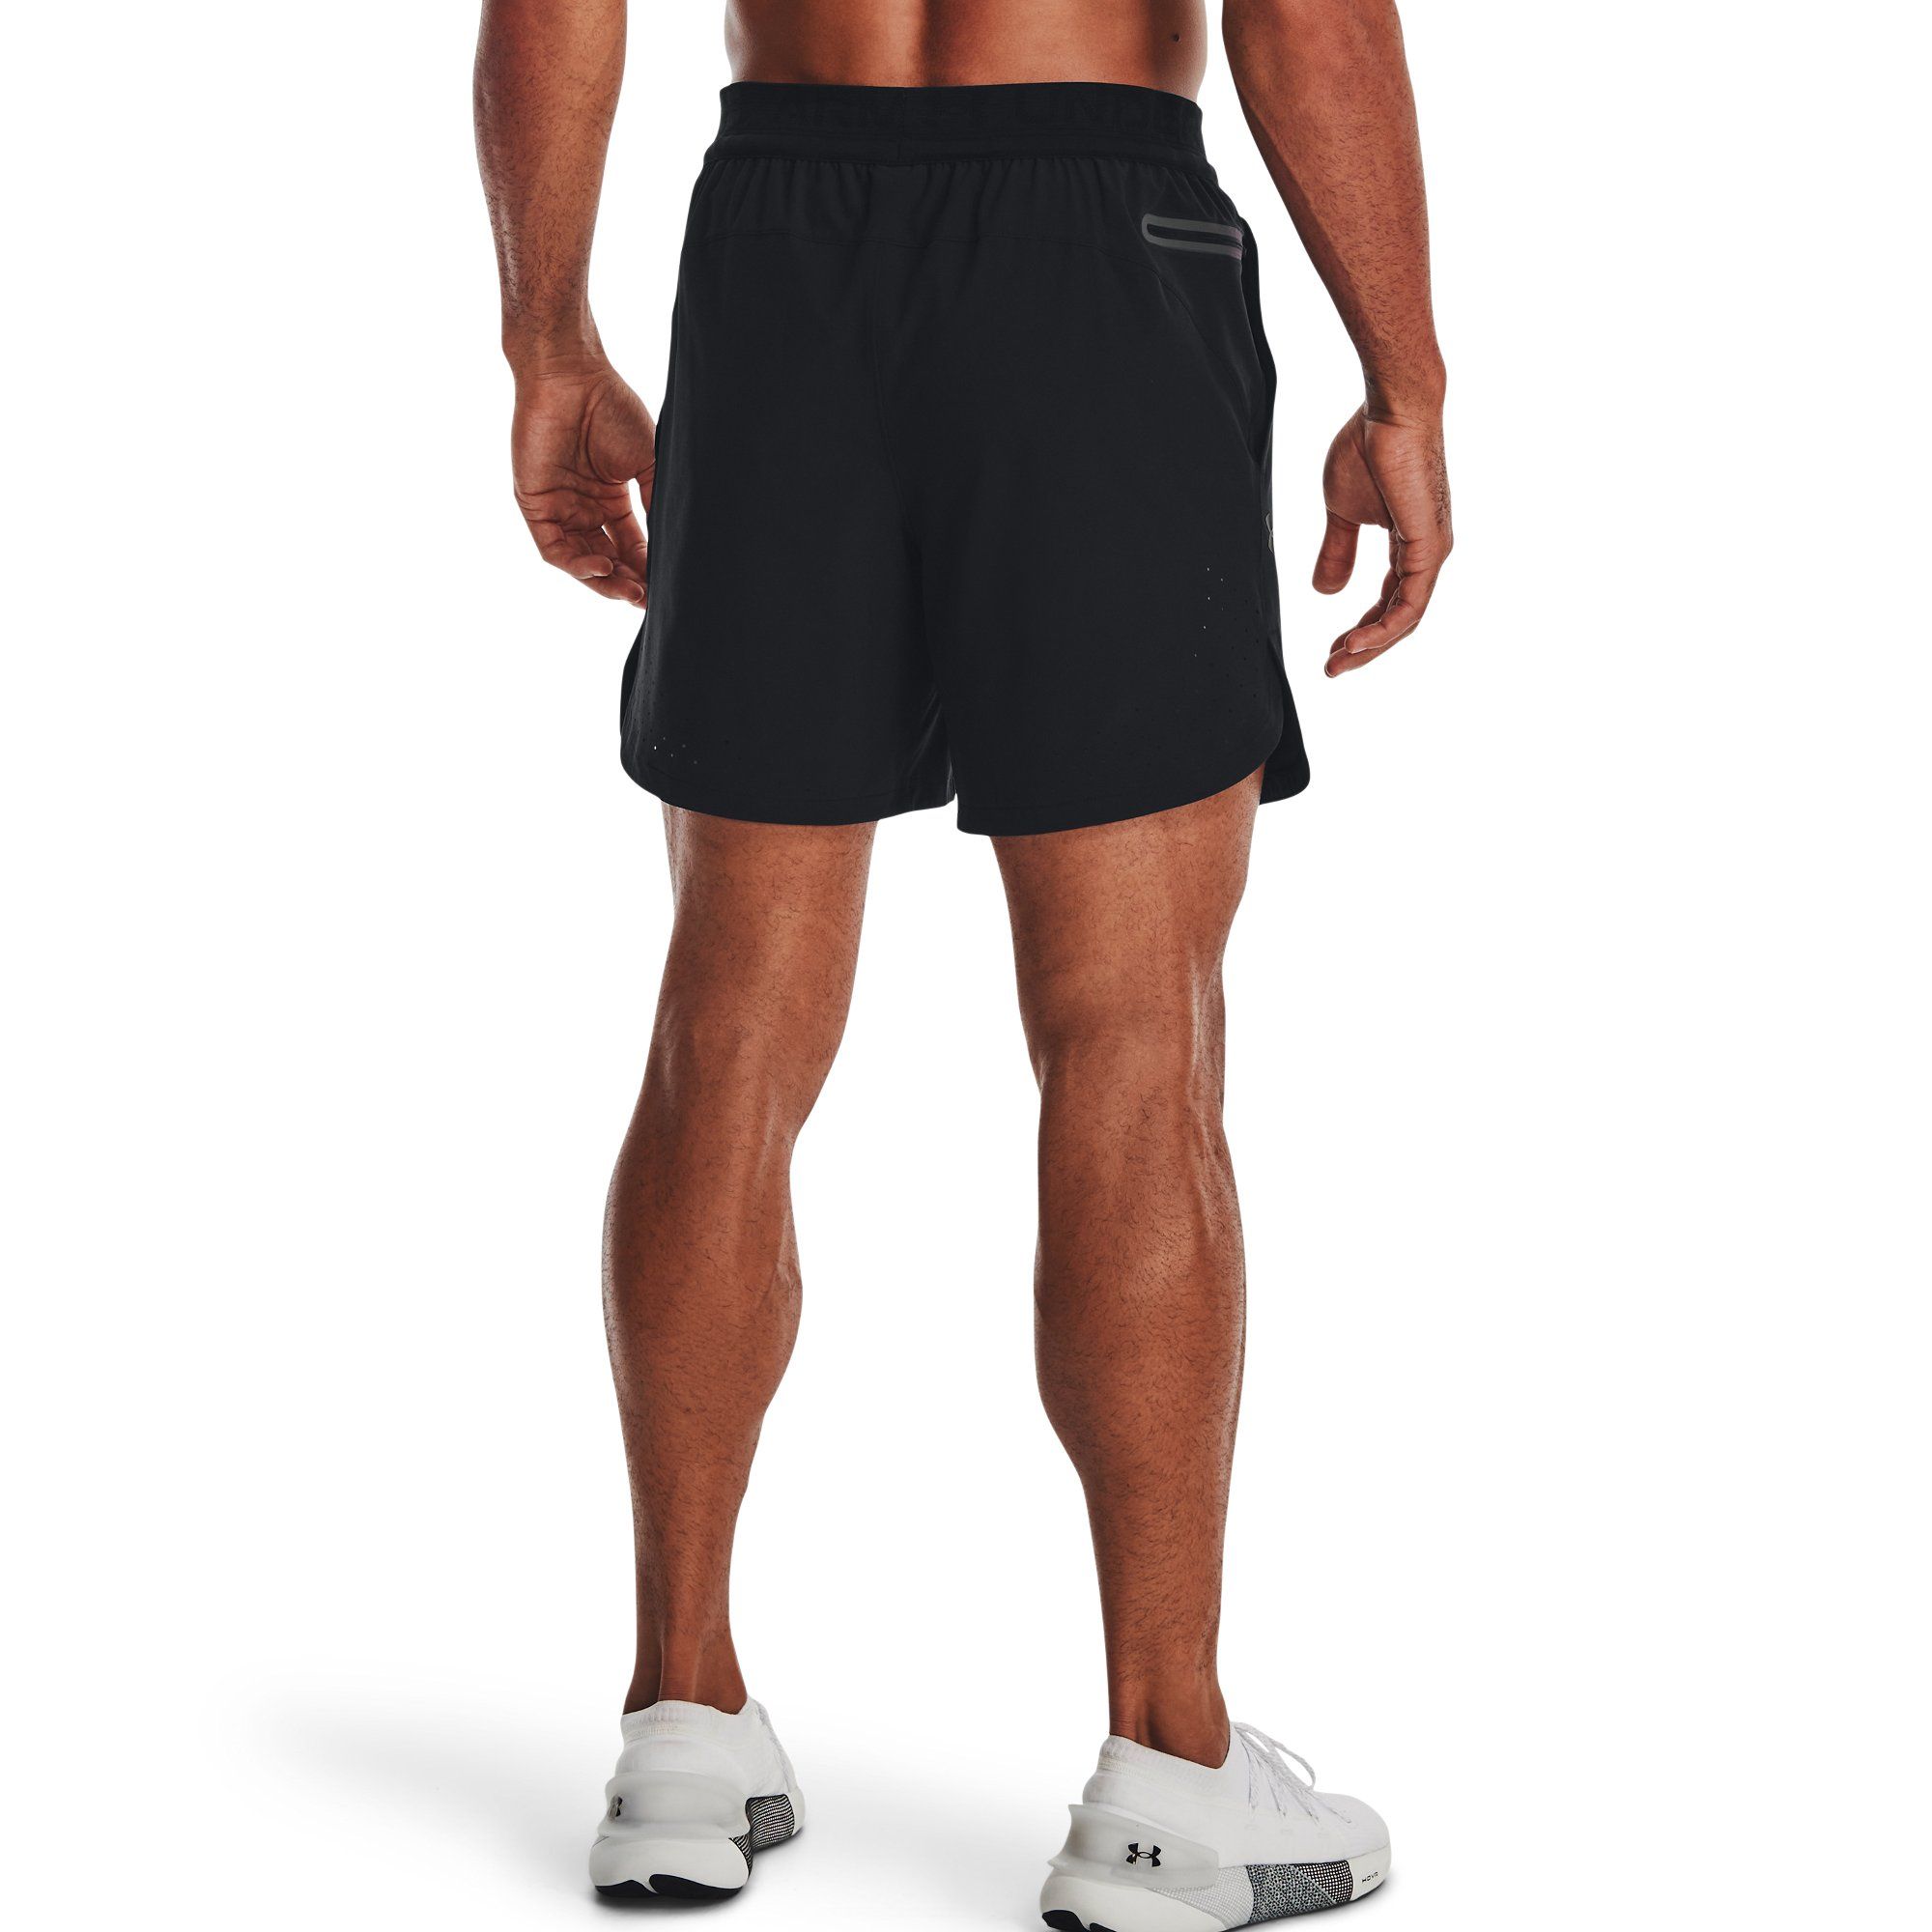  Under Armour Peak Woven Shorts - Black / Pitch Gray 